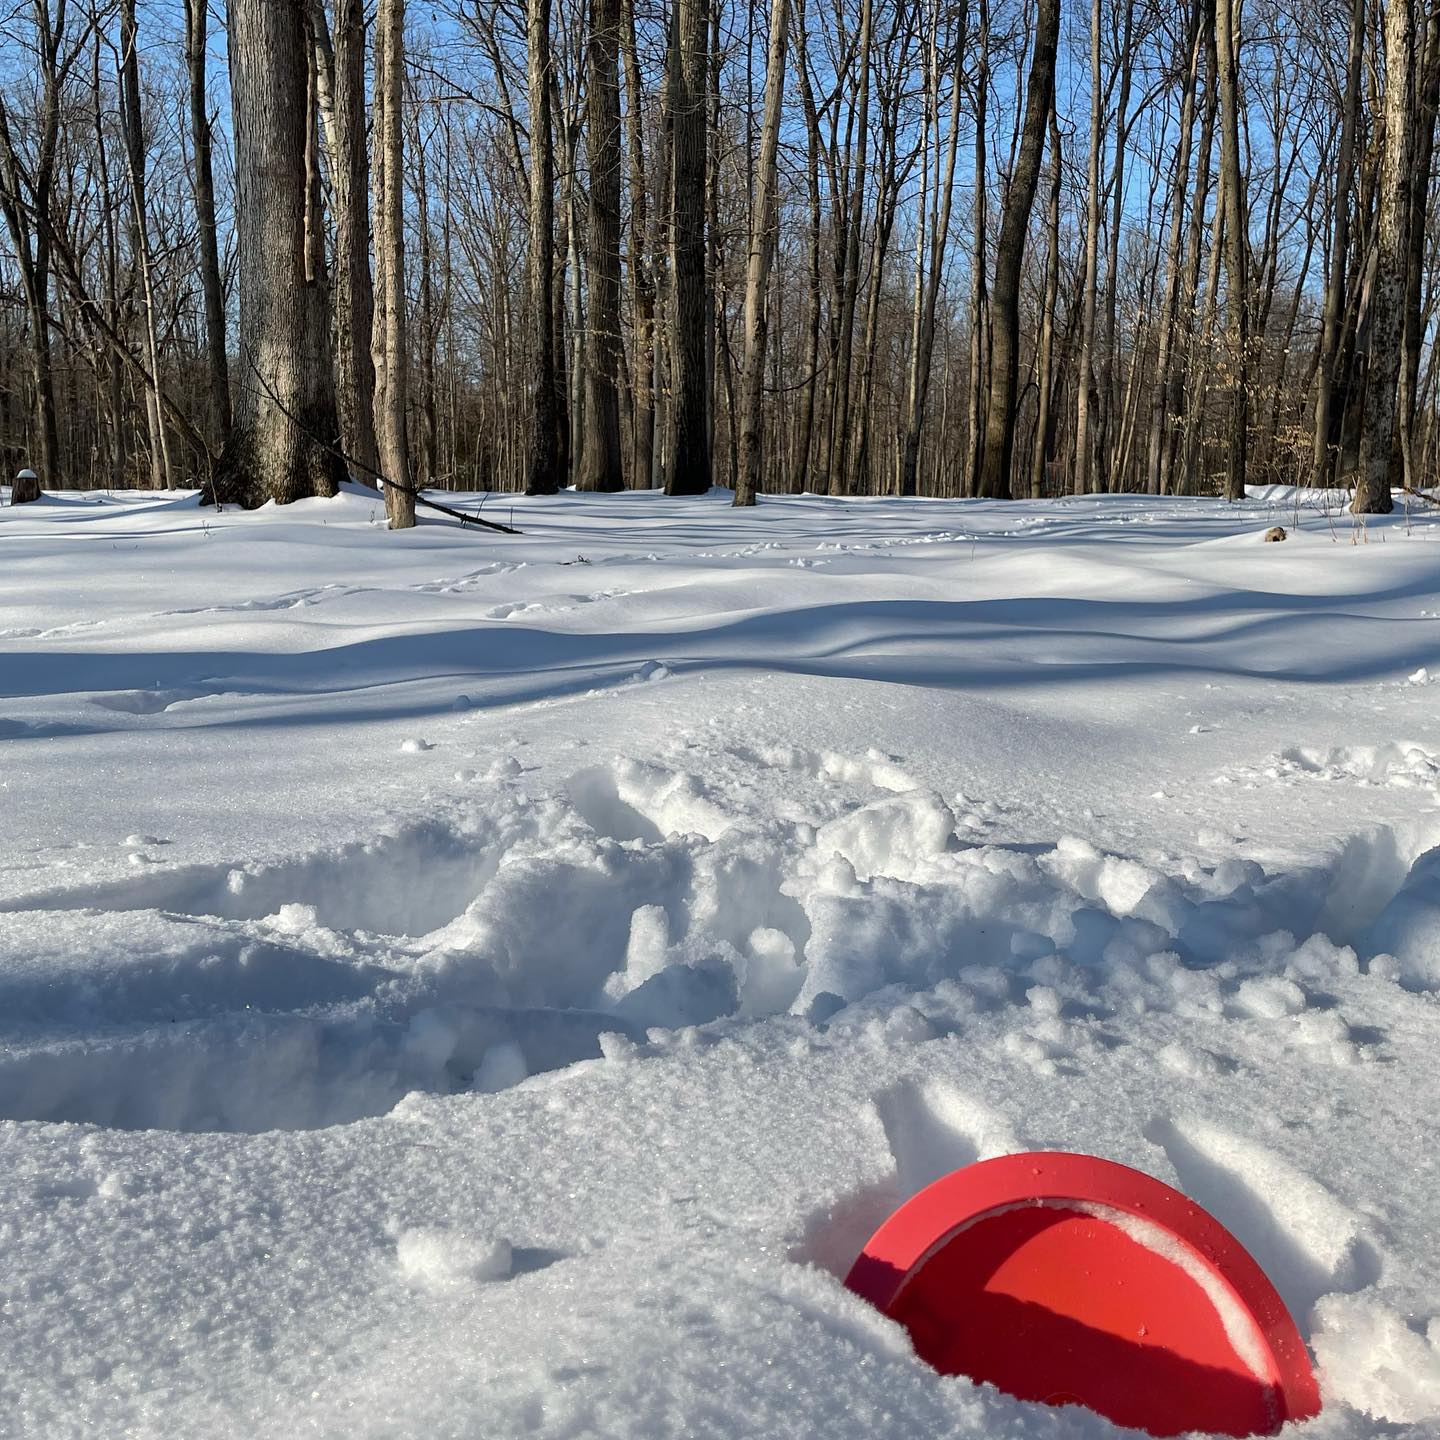 9” of snow? Let’s play disc golf.